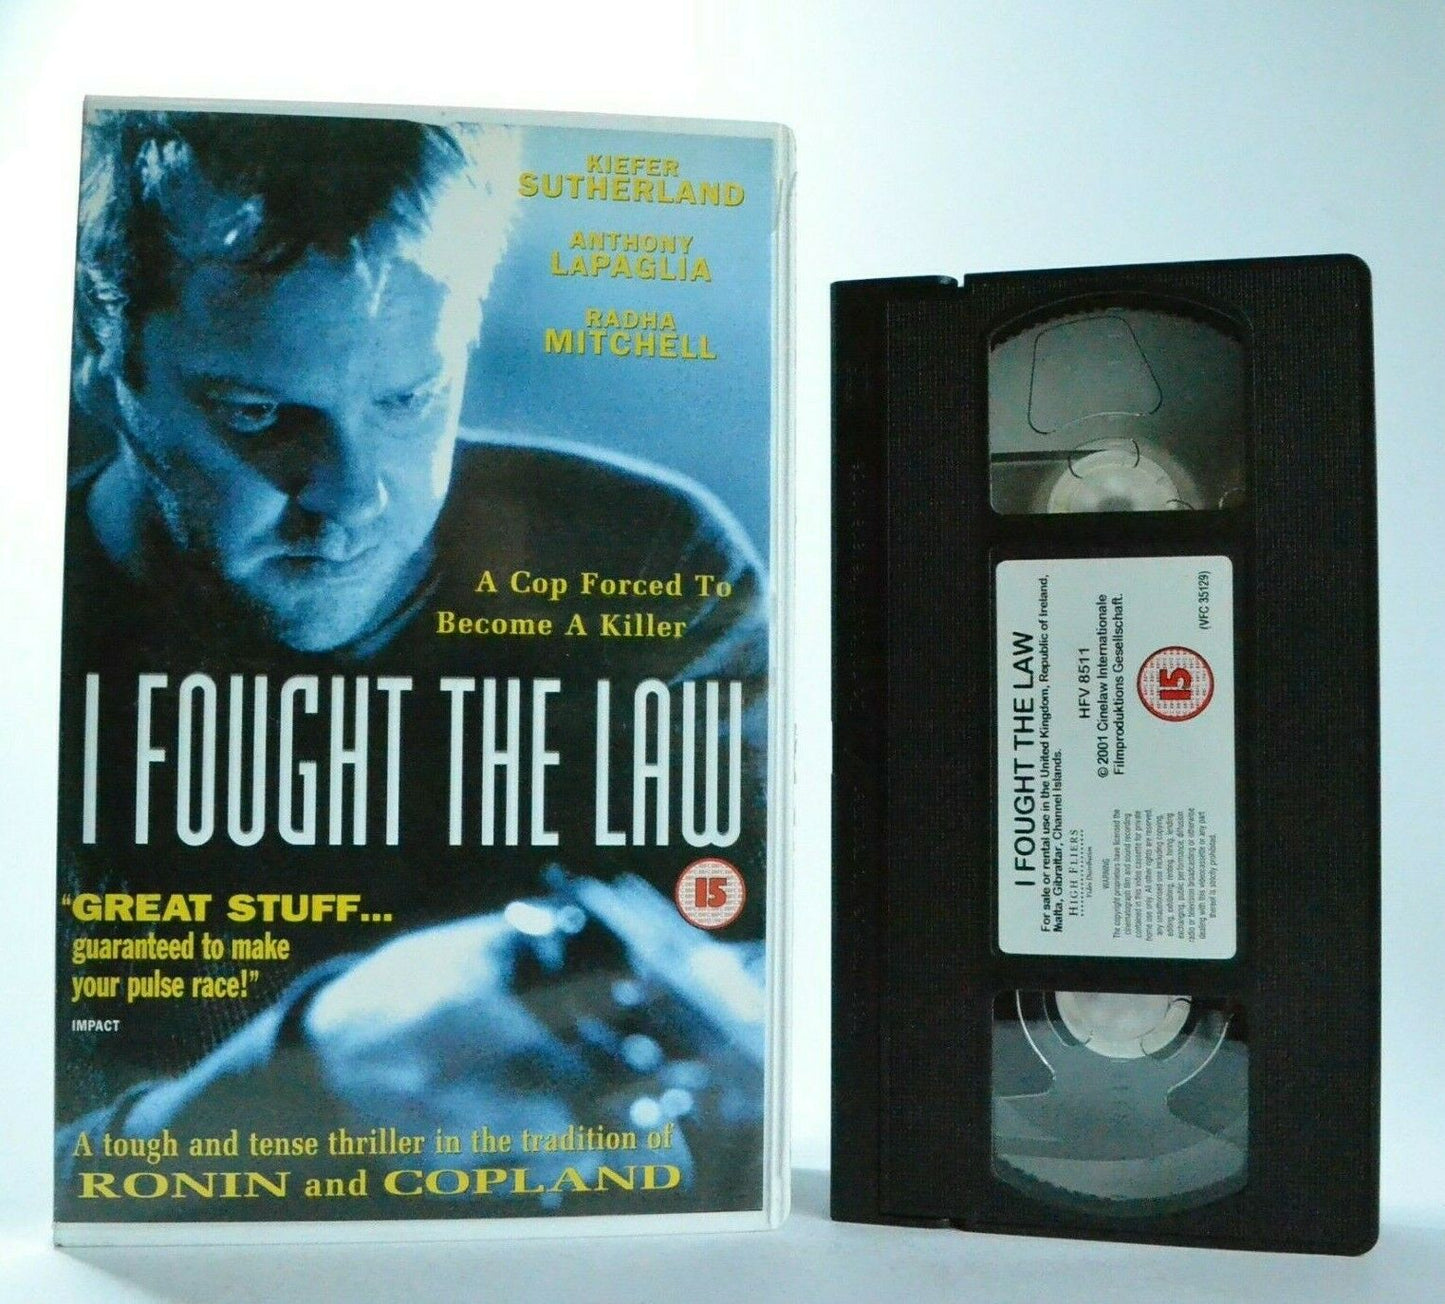 I Fought The Law (Dead Heat): Crime Comedy (2002) - Kiefer Sutherland - Pal VHS-